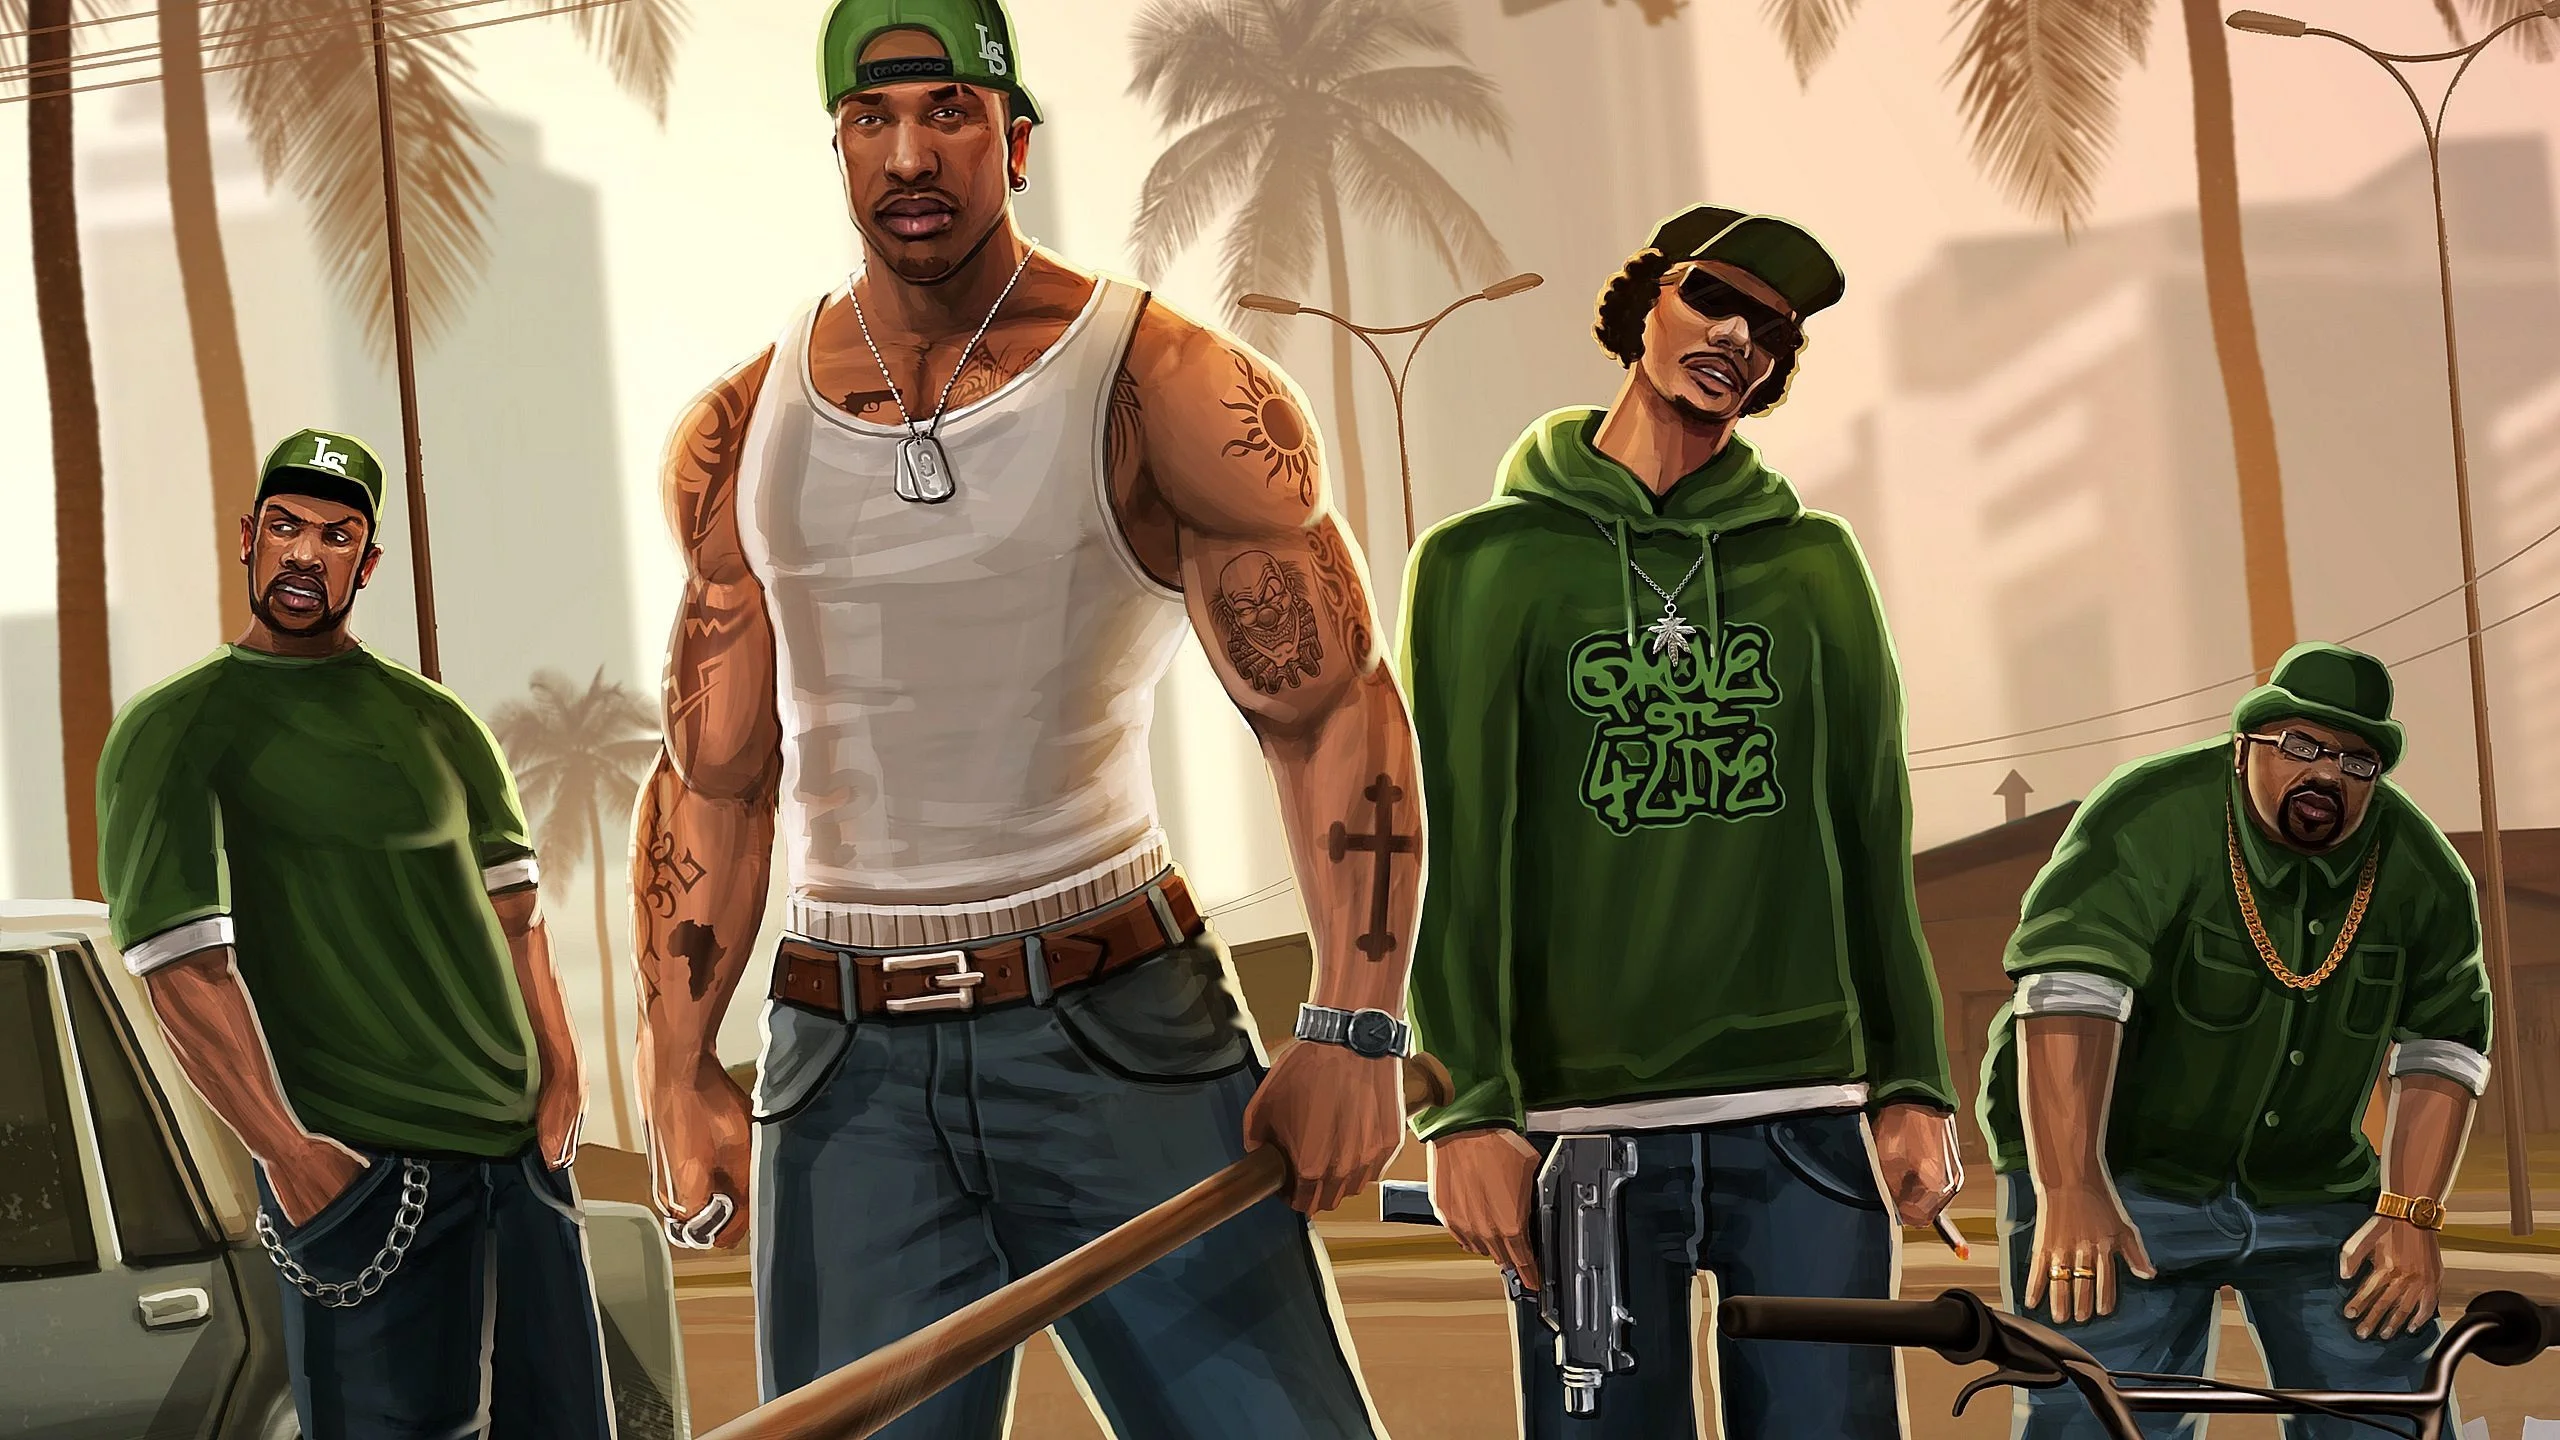 The neural network made real people out of GTA: San Andreas characters